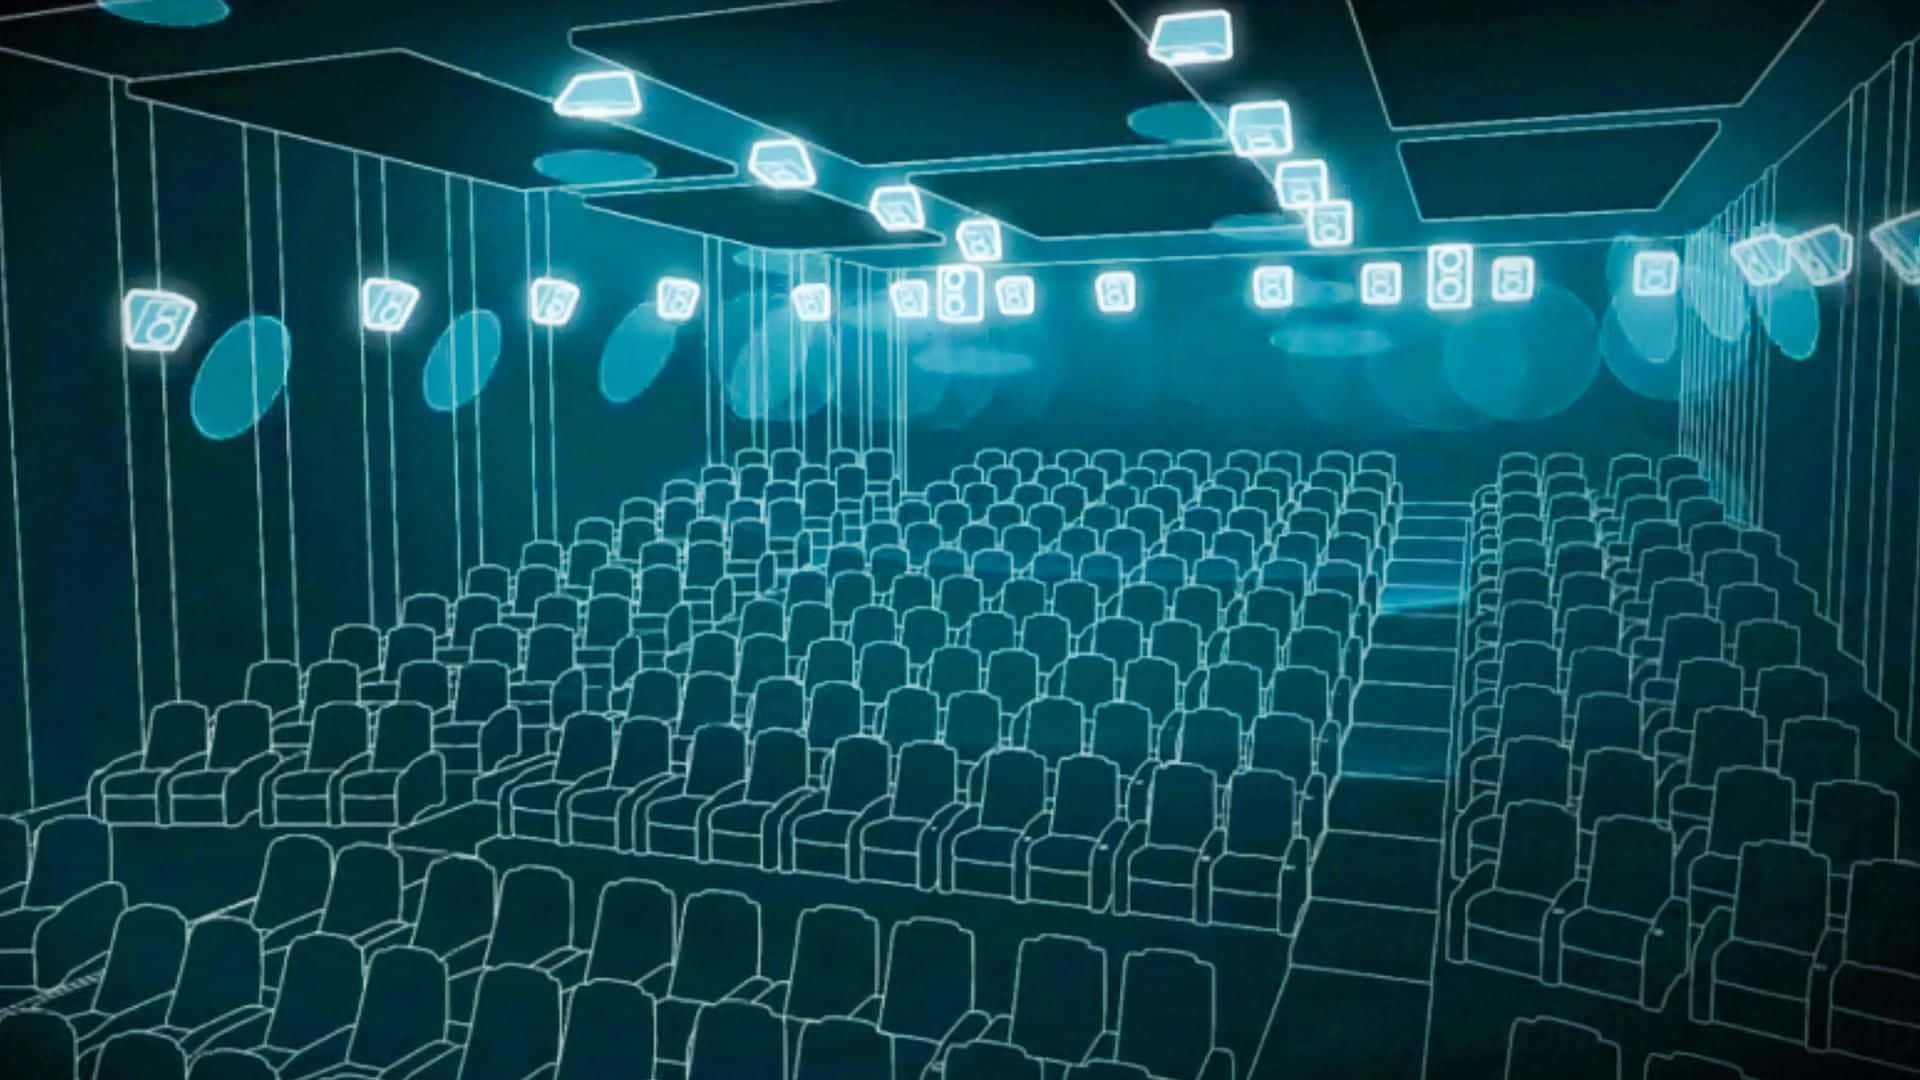 Experience the ultimate 3D surround sound with Dolby Atmos Wallpaper